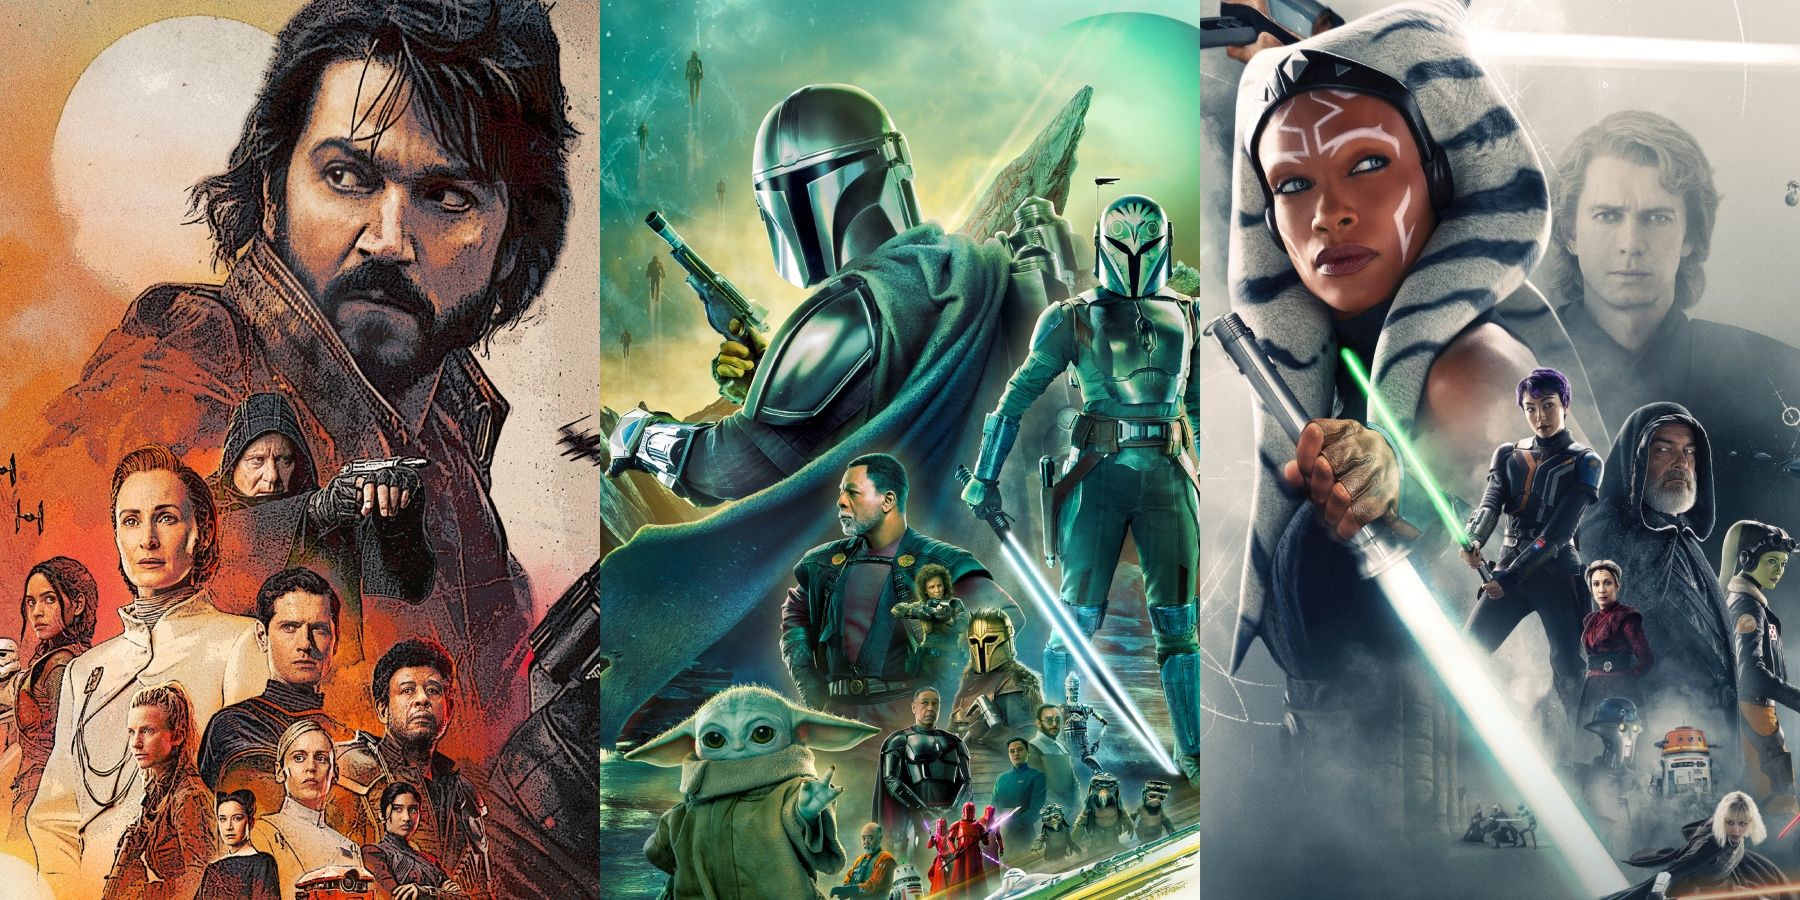 Posters for Star Wars shows/series The Mandalorian, Andor, and Ahsoka